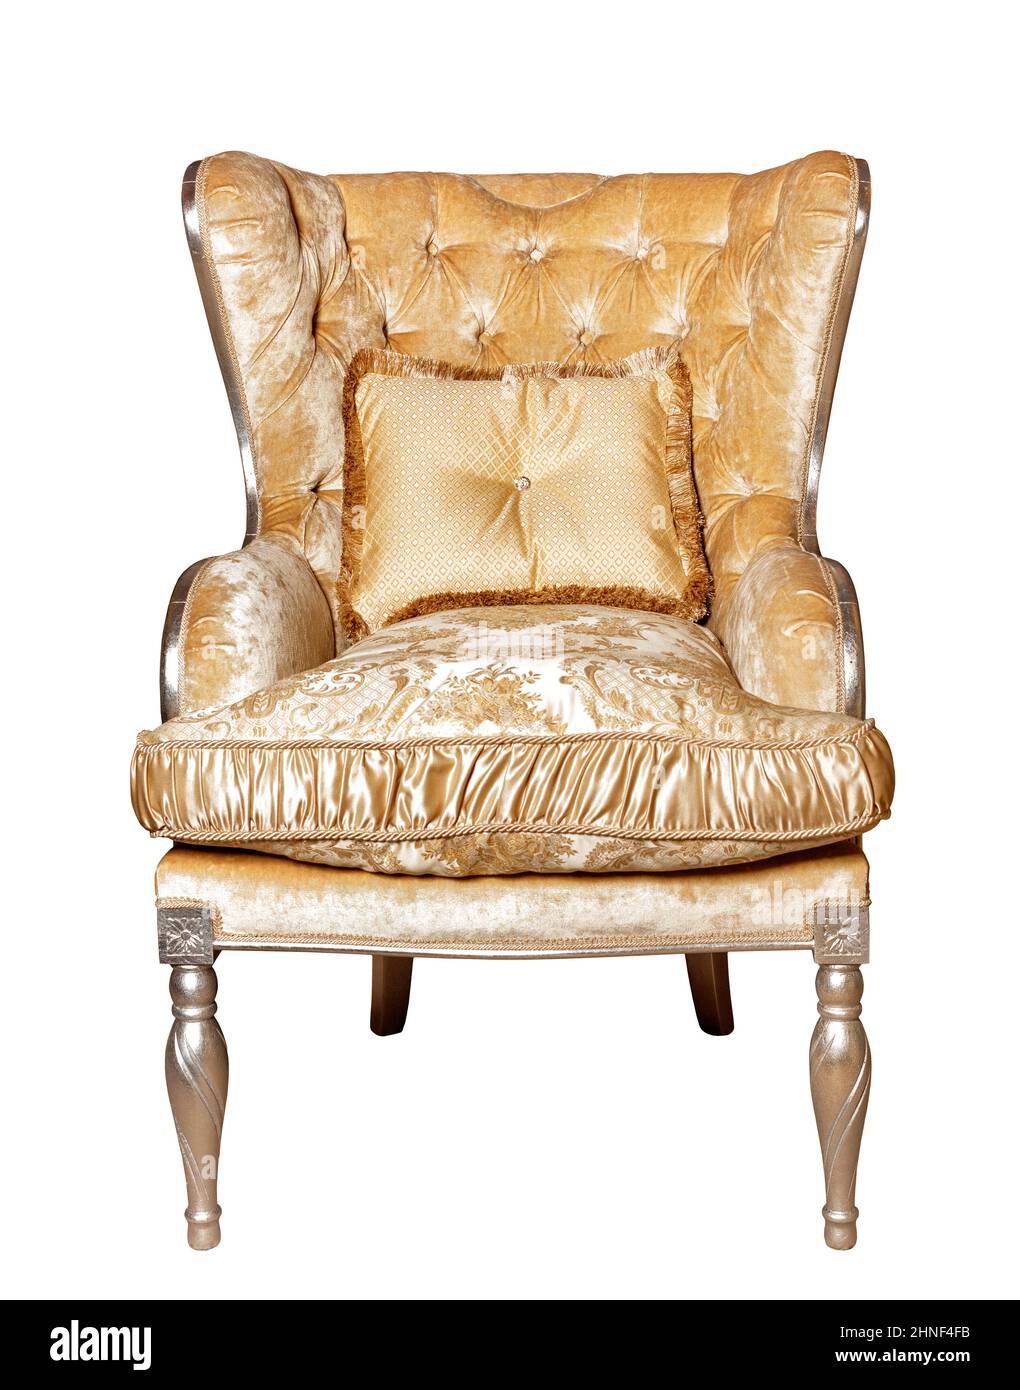 Luxurious upholstered armchair with brocade silver upholstery, isolated on a white background. Stock Photo